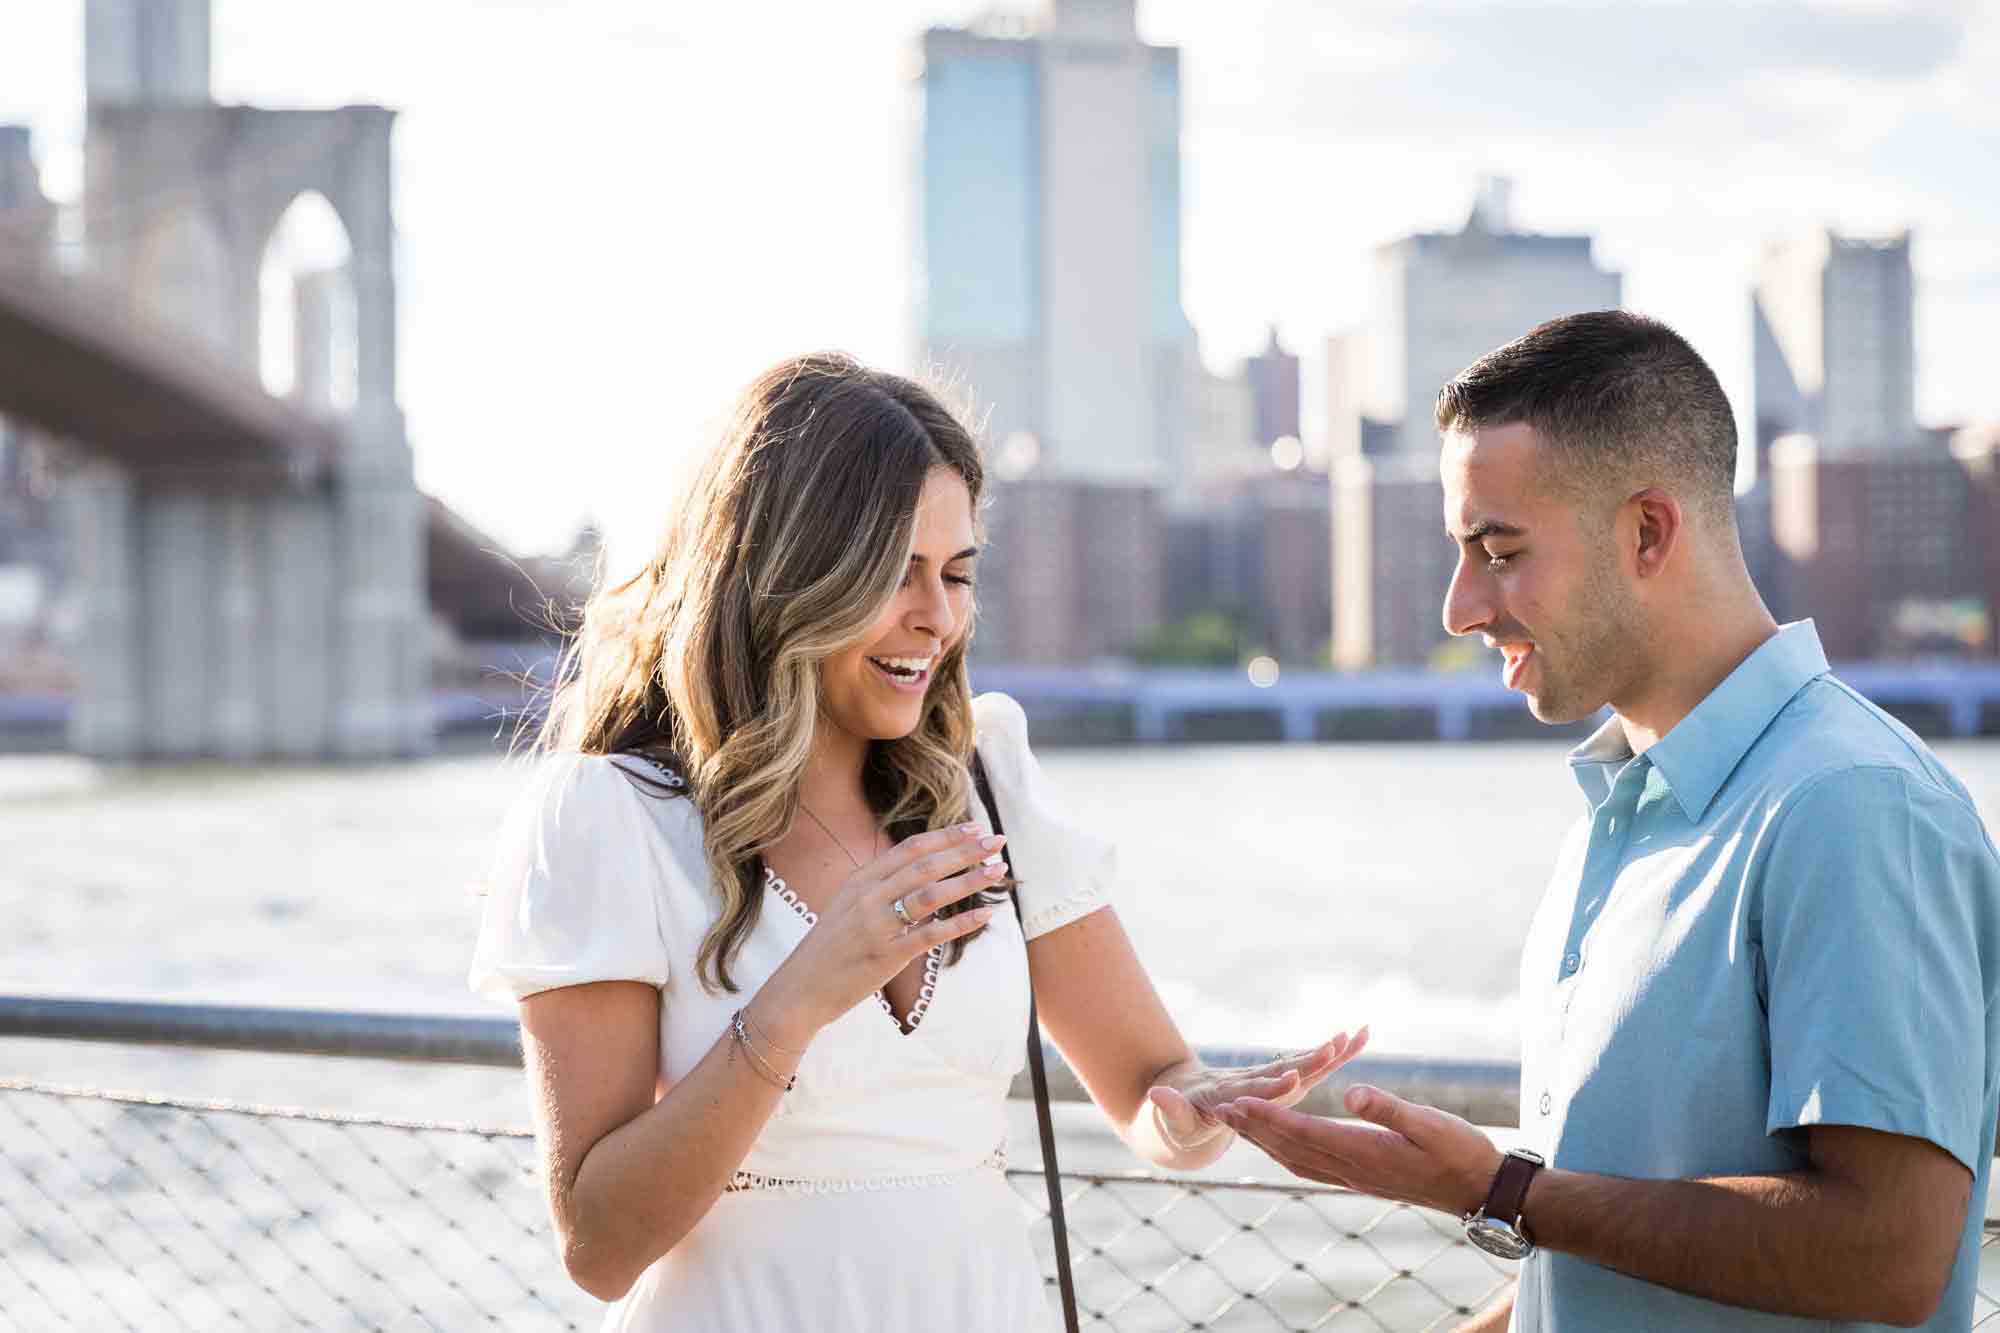 Man putting ring on woman's hand with Brooklyn Bridge in background for an article on how to propose in Brooklyn Bridge Park